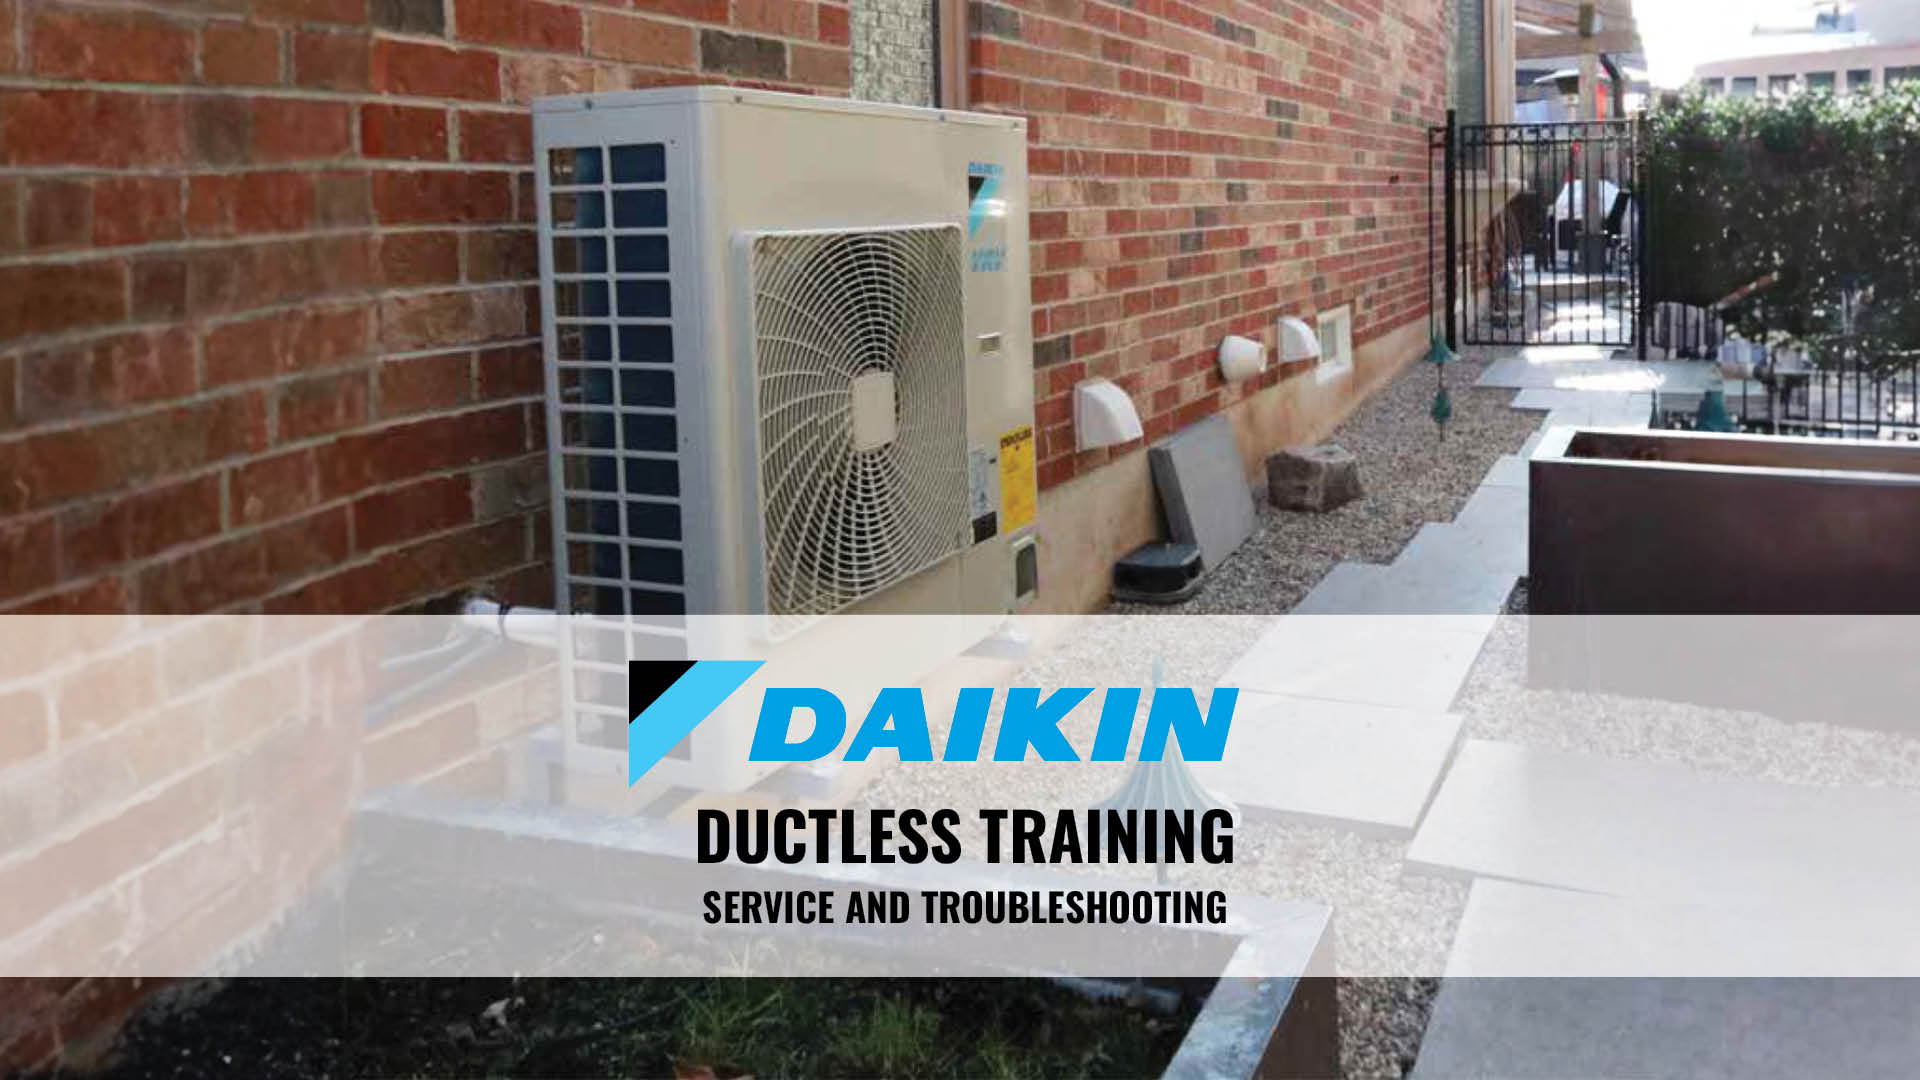 Daikin Ductless Training: Service and Troubleshooting in Kelowna